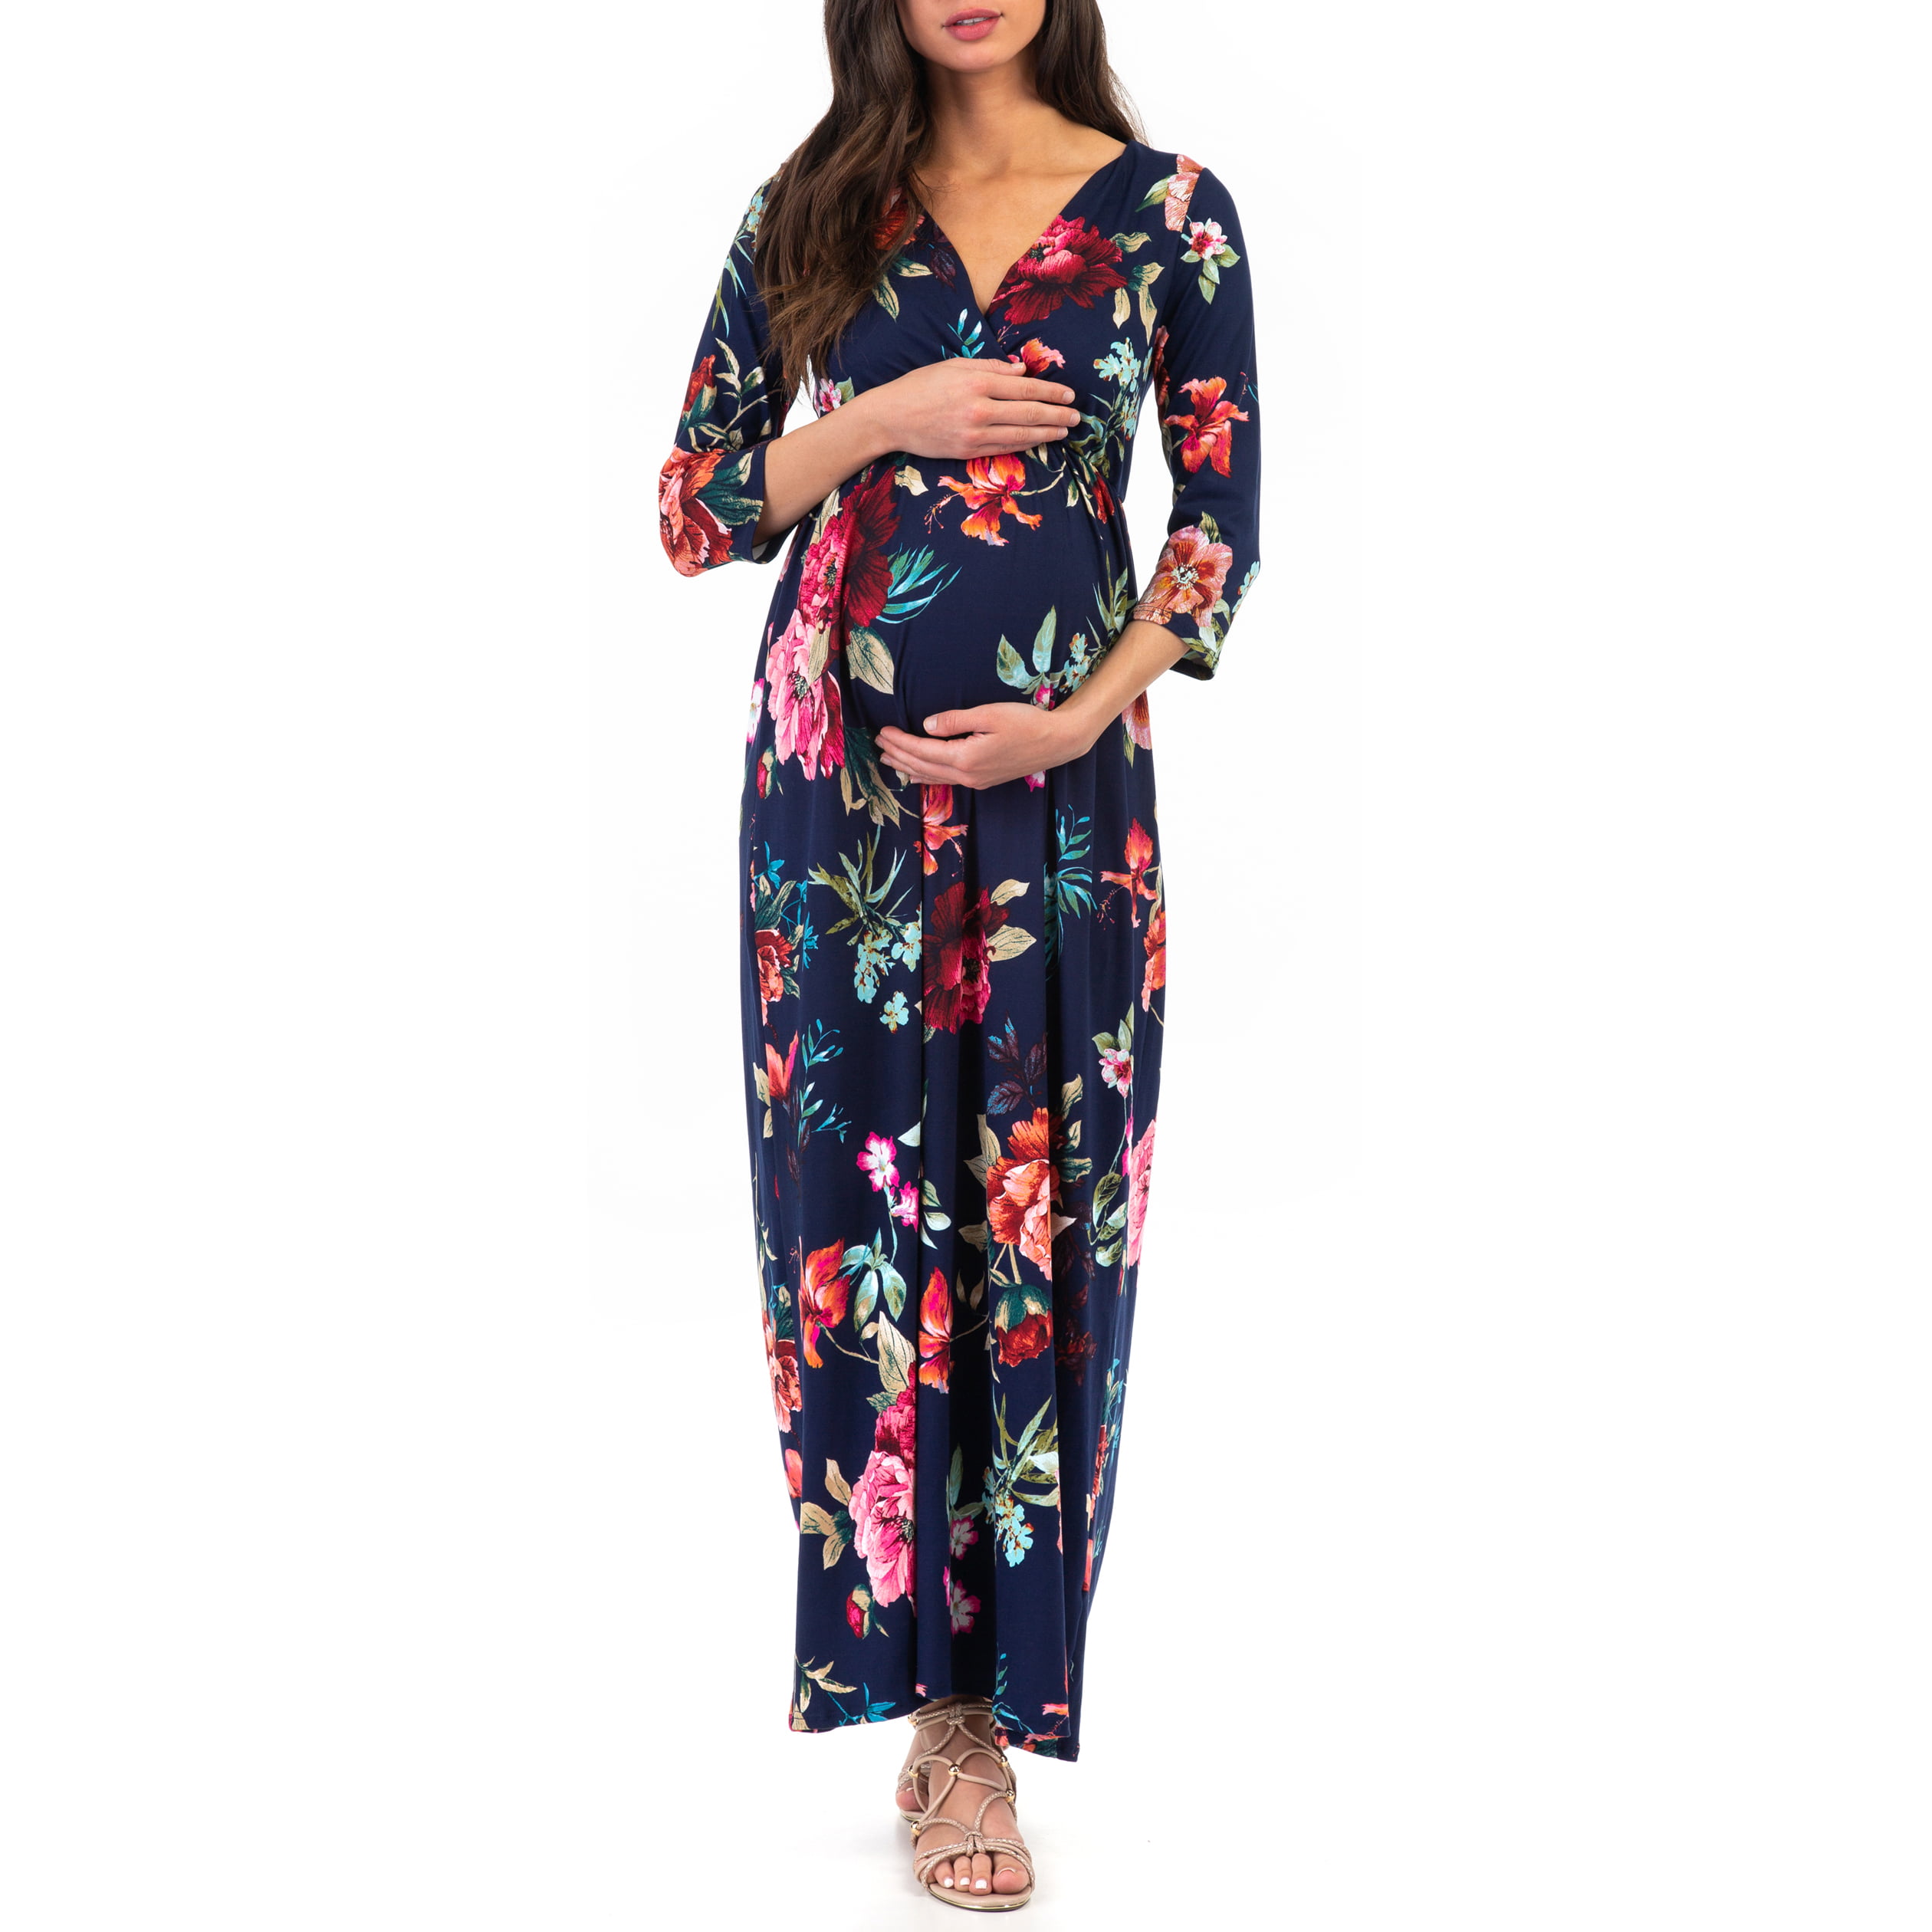 Xpenyo Maternity Wrap Dress with Empire Waist 3/4 Sleeve Pregnancy Dress for Baby Showers or Casual Wear 